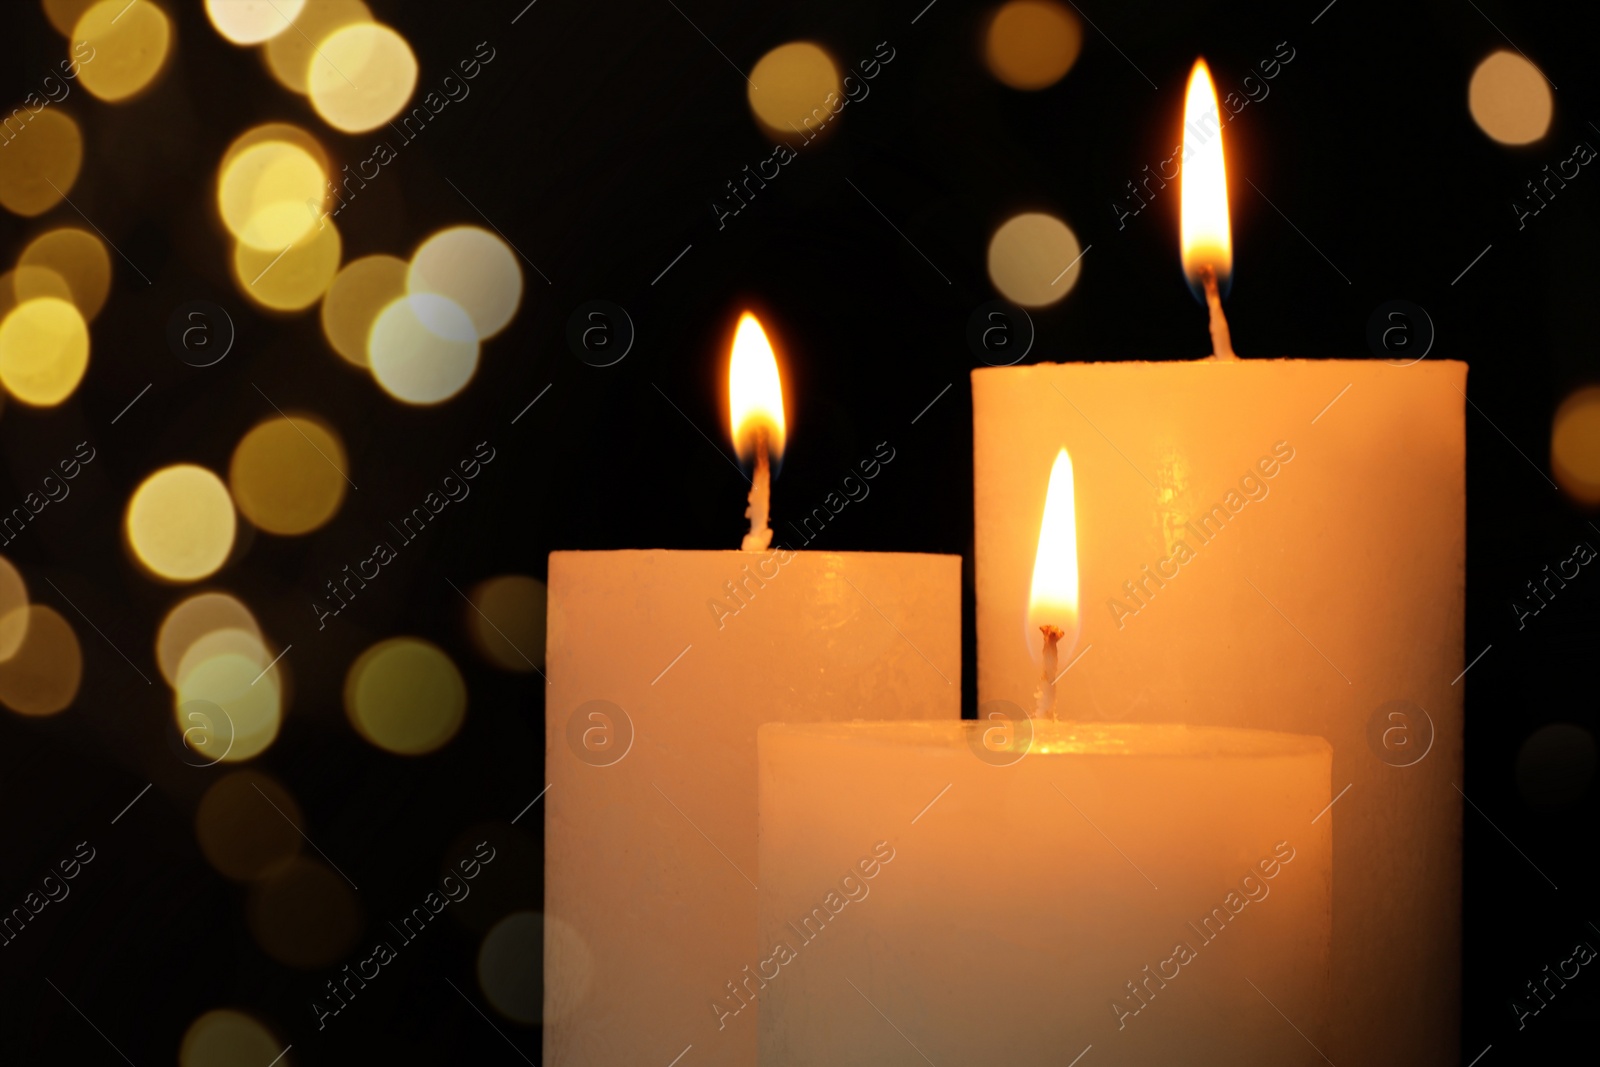 Image of Burning candles on dark background with blurred lights. Bokeh effect